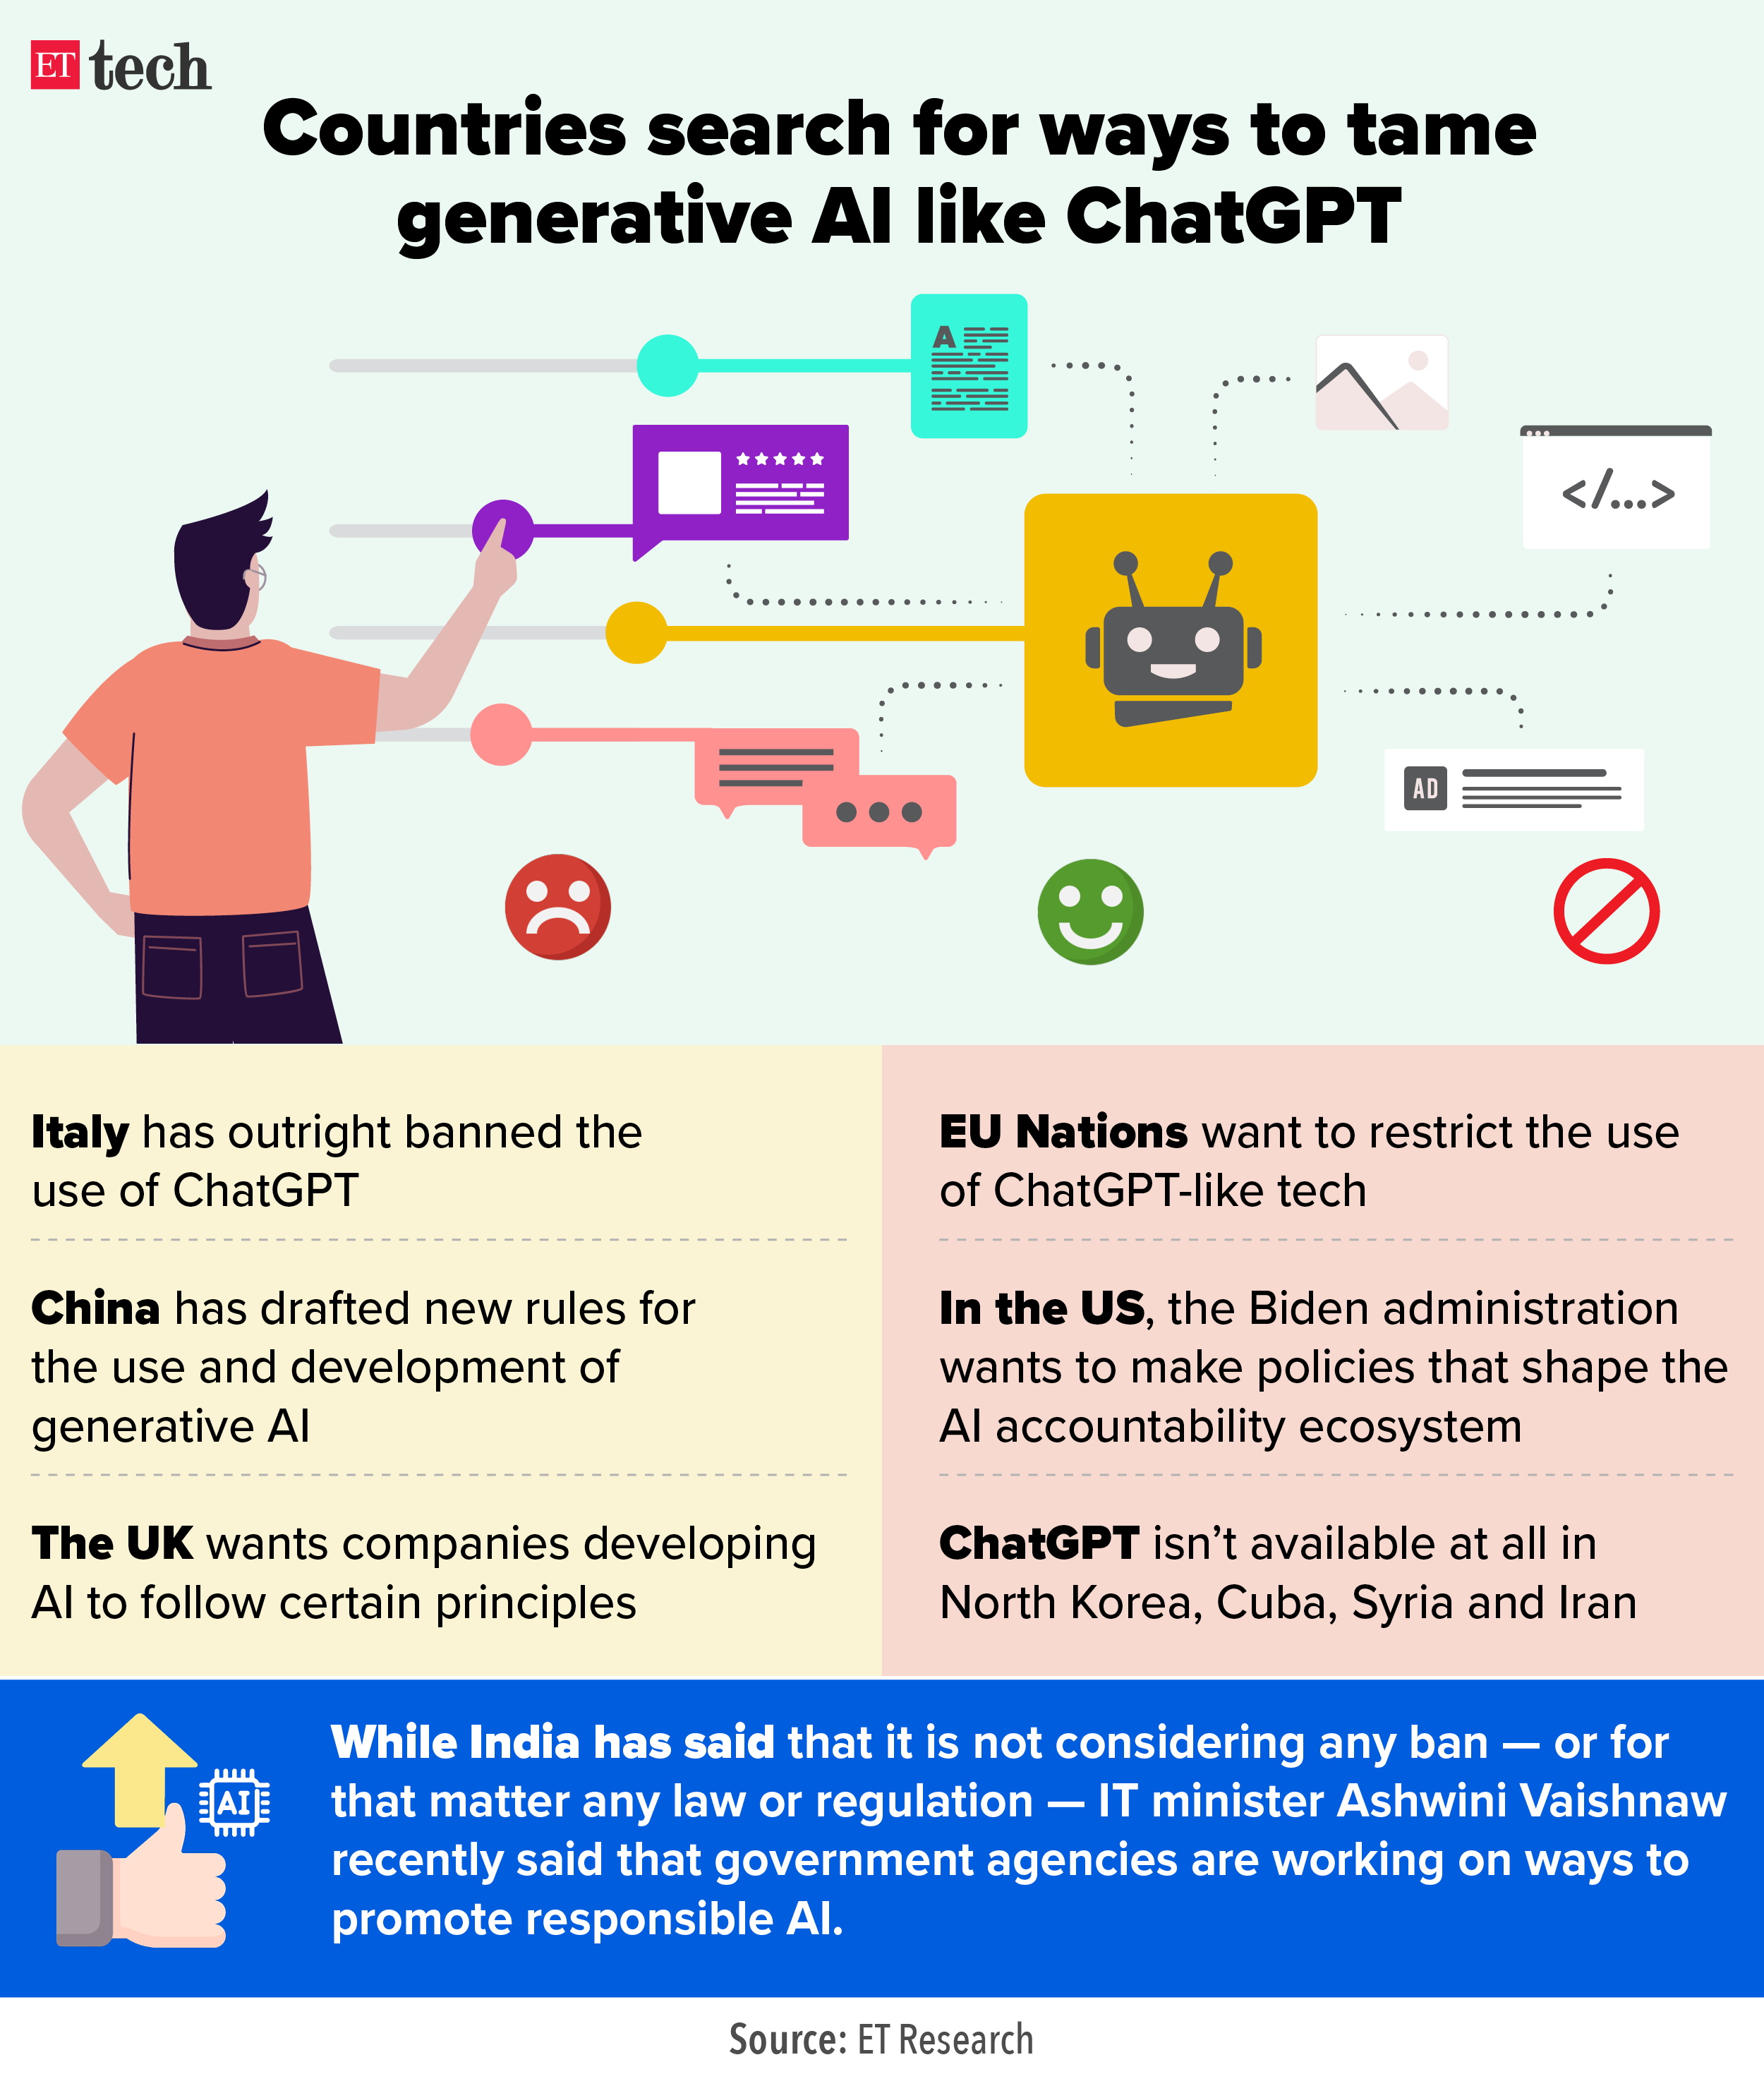 Countries search for ways to tame generative AI like ChatGPT